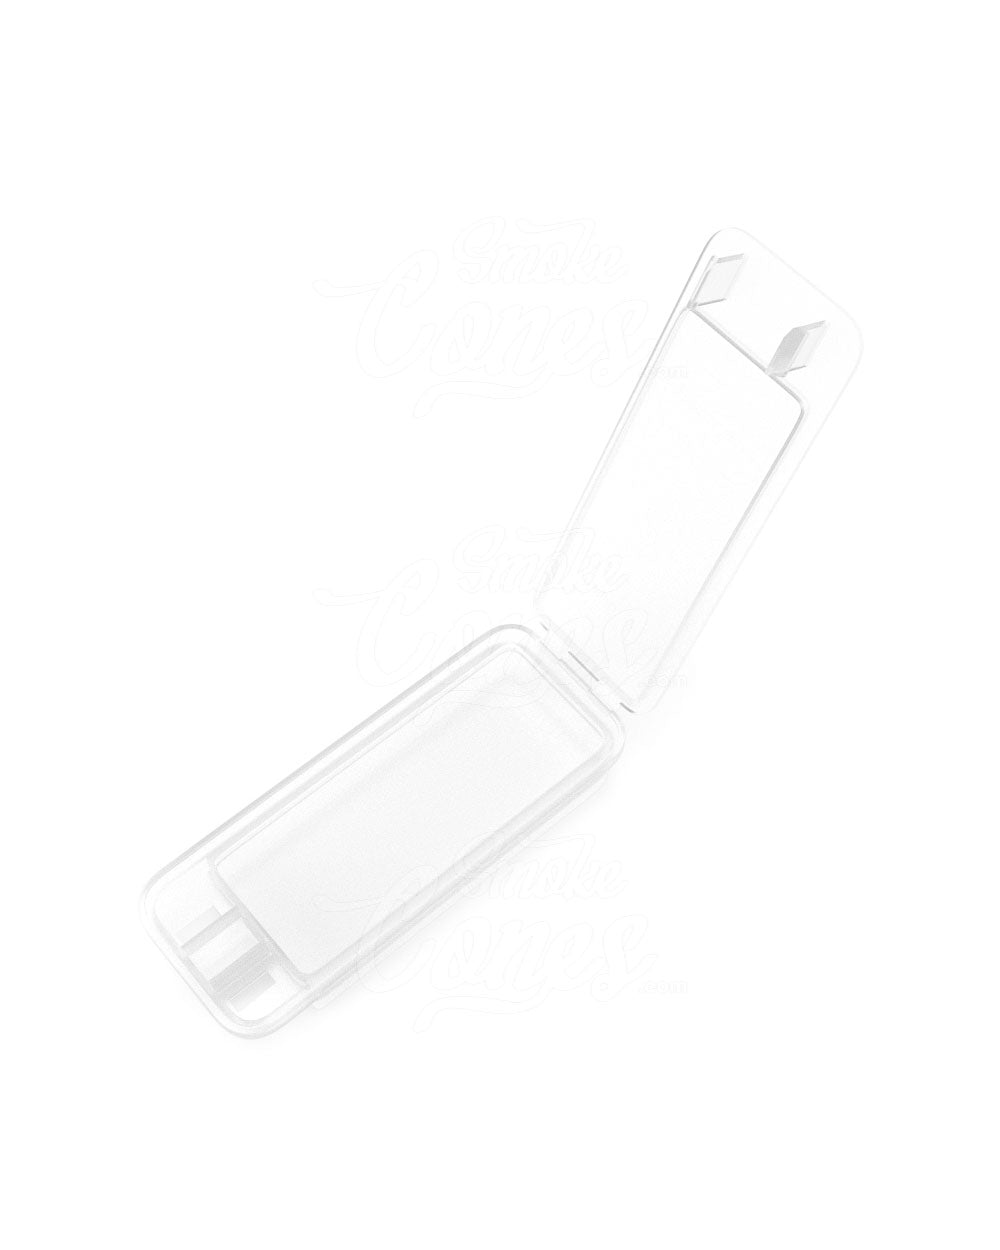 70mm Pollen Gear Clear SnapTech Child Resistant Edible & Pre-Roll Small Joint Case 240/Box - 5